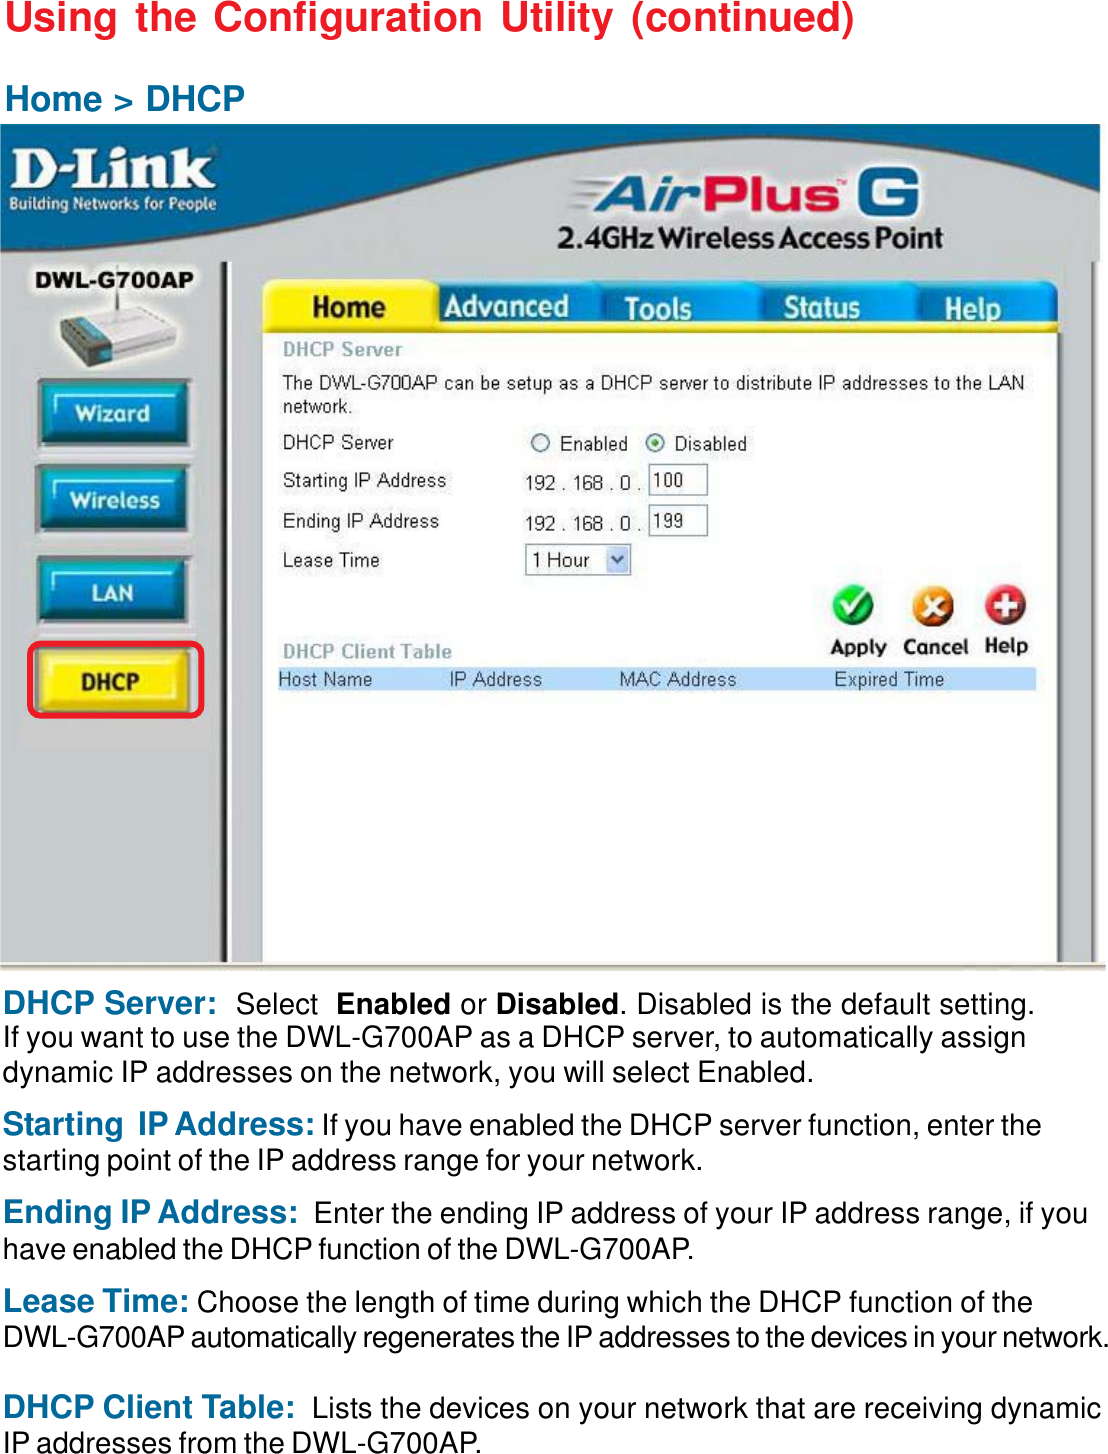 12Using the Configuration Utility (continued)Home &gt; DHCPDHCP Server:  Select Enabled or Disabled. Disabled is the default setting.If you want to use the DWL-G700AP as a DHCP server, to automatically assigndynamic IP addresses on the network, you will select Enabled.Starting  IP Address: If you have enabled the DHCP server function, enter thestarting point of the IP address range for your network.Ending IP Address: Enter the ending IP address of your IP address range, if youhave enabled the DHCP function of the DWL-G700AP.Lease Time: Choose the length of time during which the DHCP function of theDWL-G700AP automatically regenerates the IP addresses to the devices in your network.DHCP Client Table:  Lists the devices on your network that are receiving dynamicIP addresses from the DWL-G700AP.